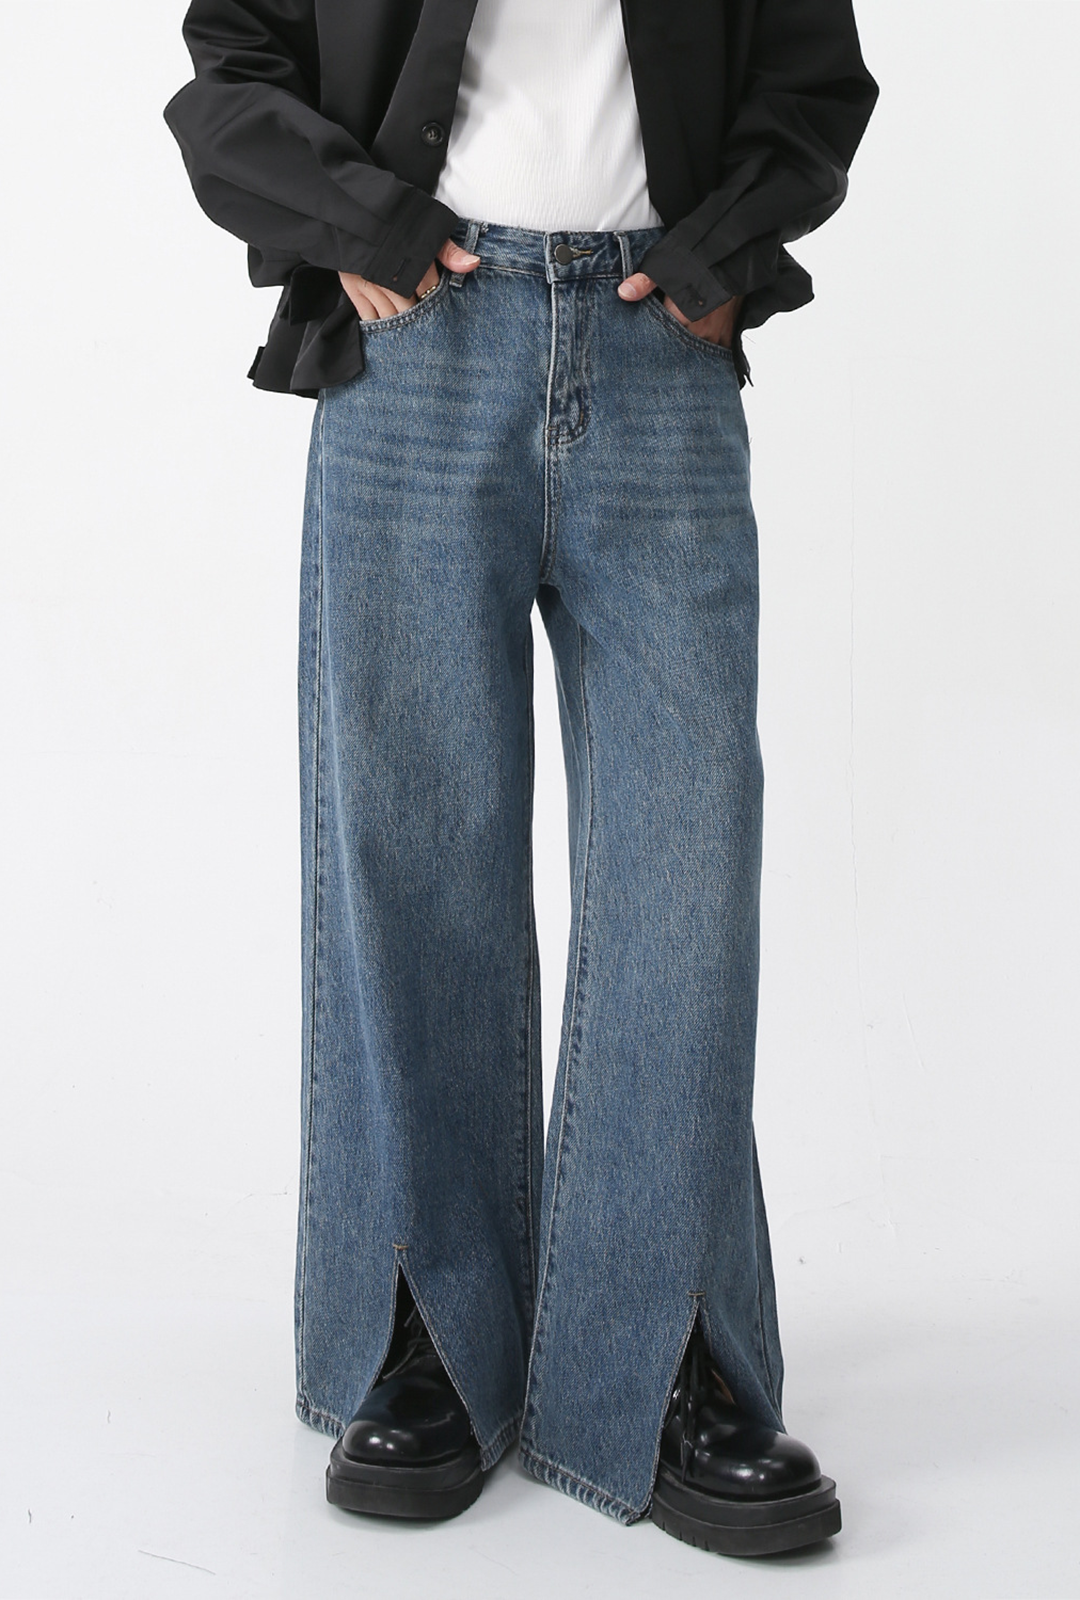 Paddy Bootcut Loose Jeans